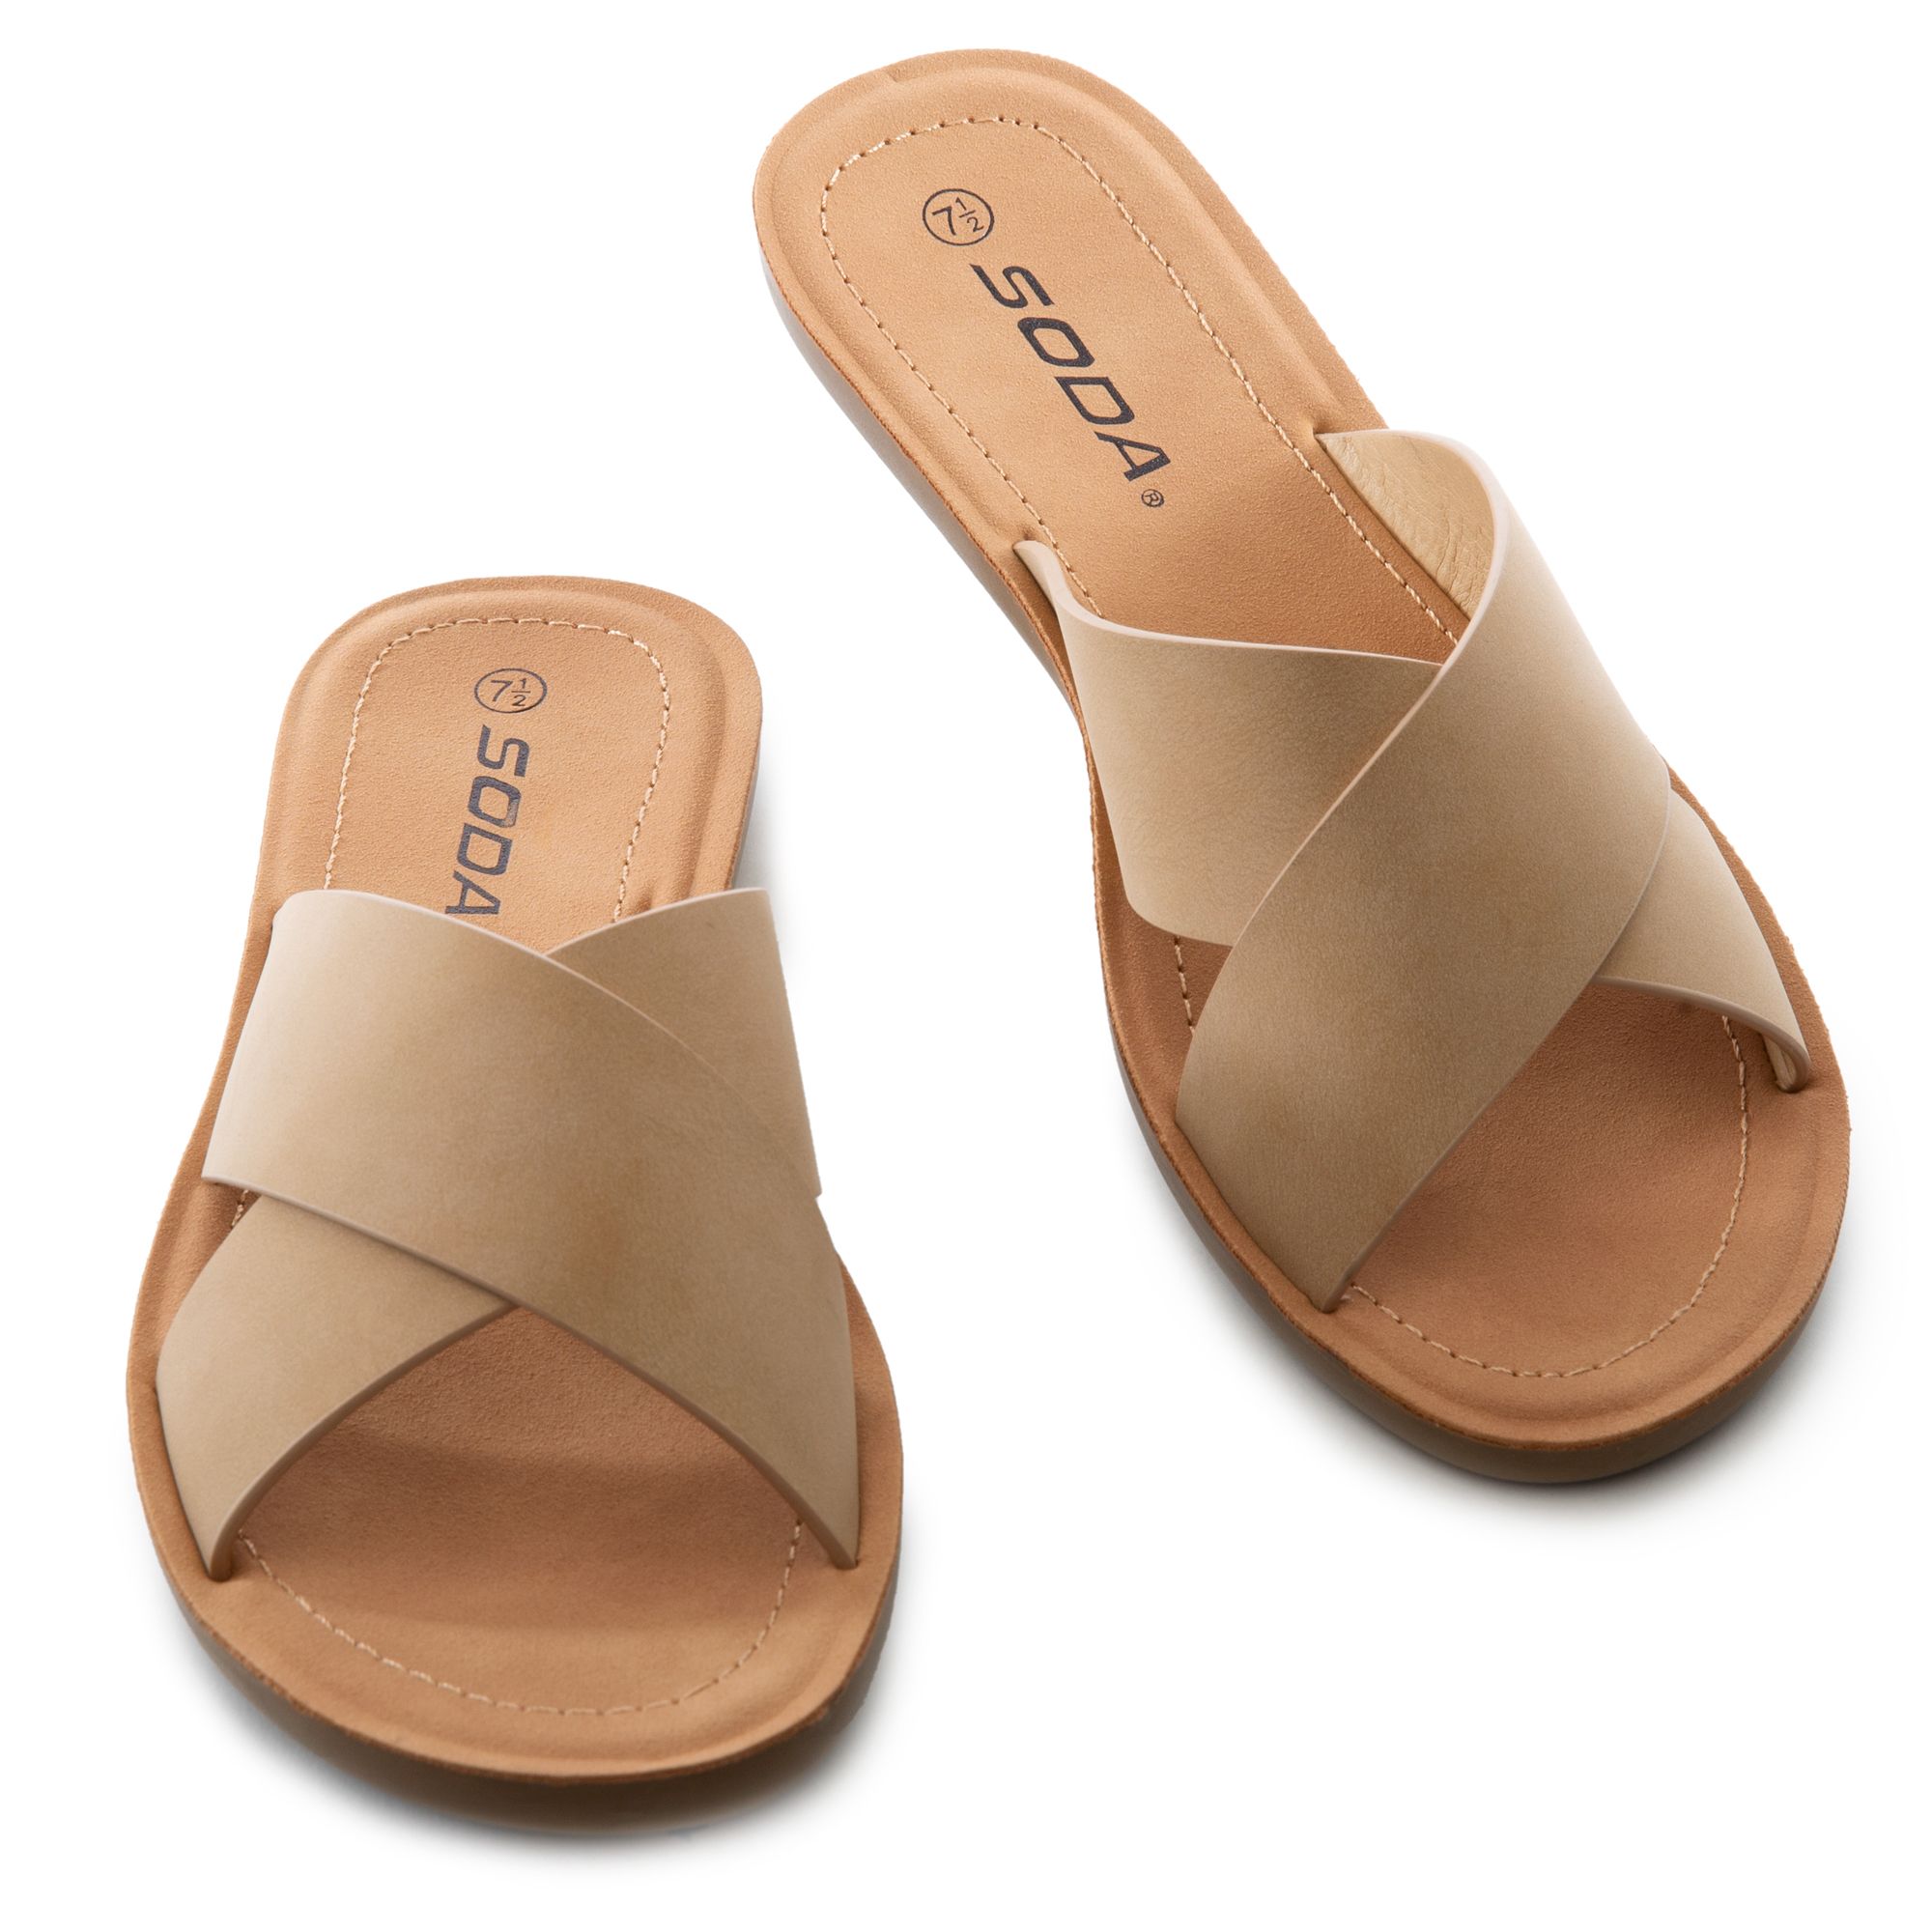 FORTUNE DYNAMICS Type-S Criss Cross Band Sandals FD TYPE-S NAT - Shiekh